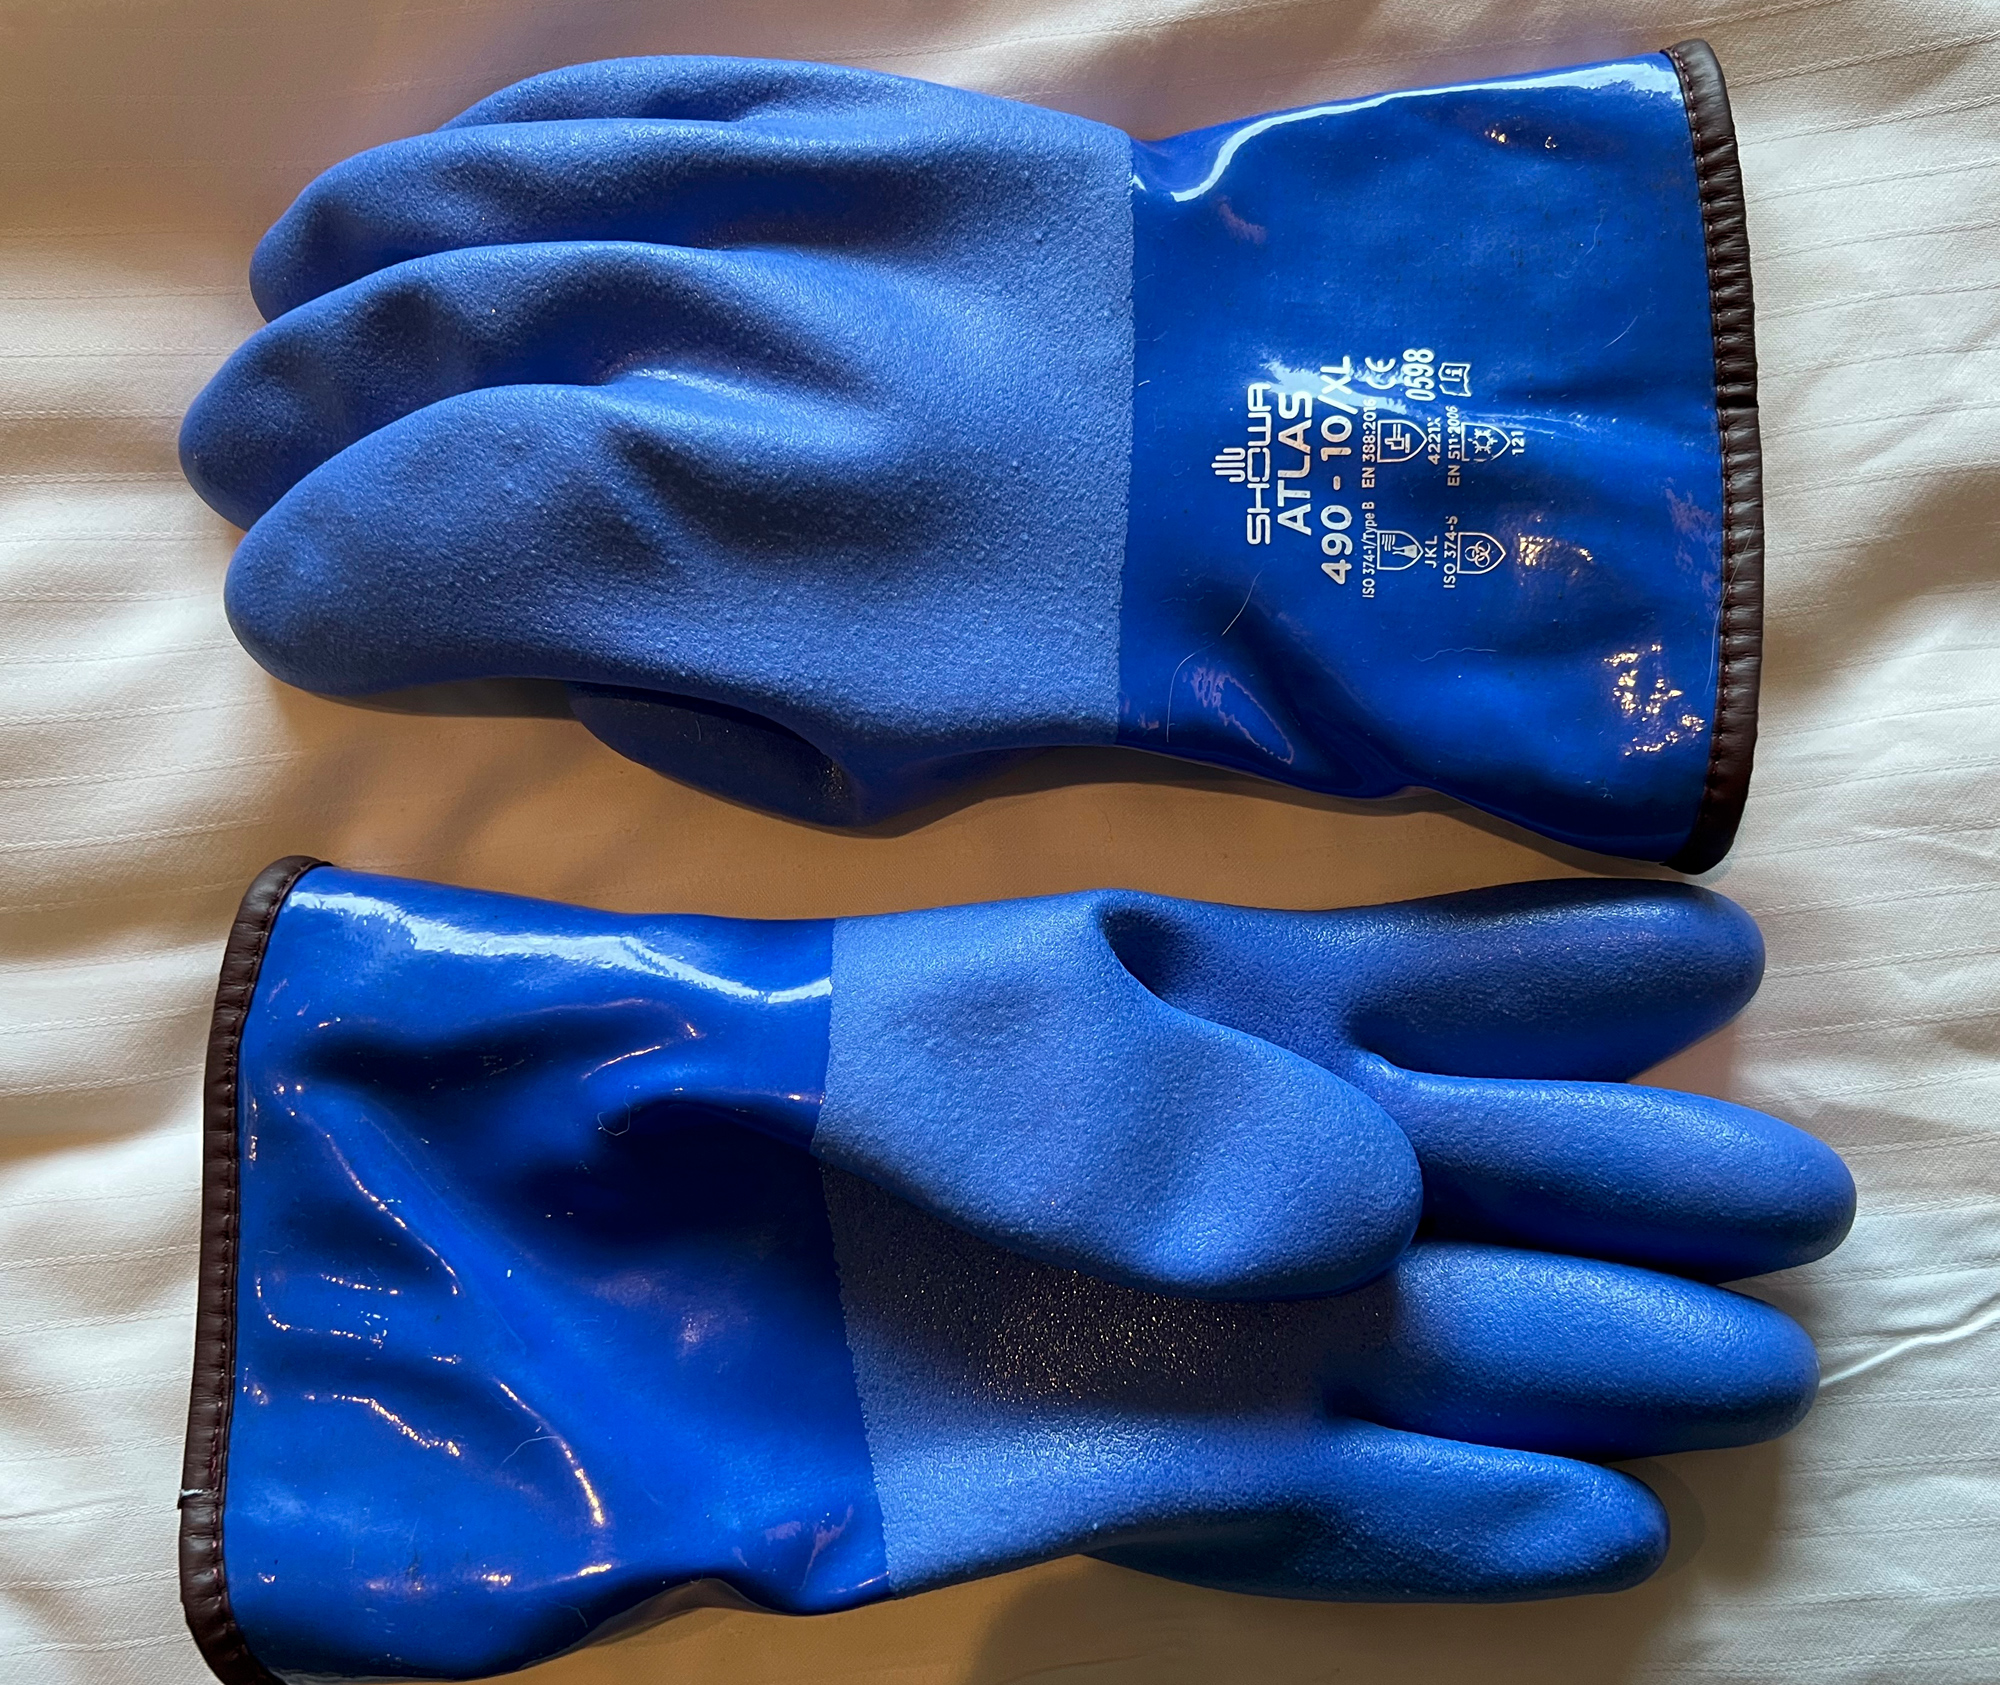 These are the best gloves ever. They are waterproof, keep your hands warm and are textures enough you can adjust dials and setting on your camera. These have served me well. Even though they look wierd.